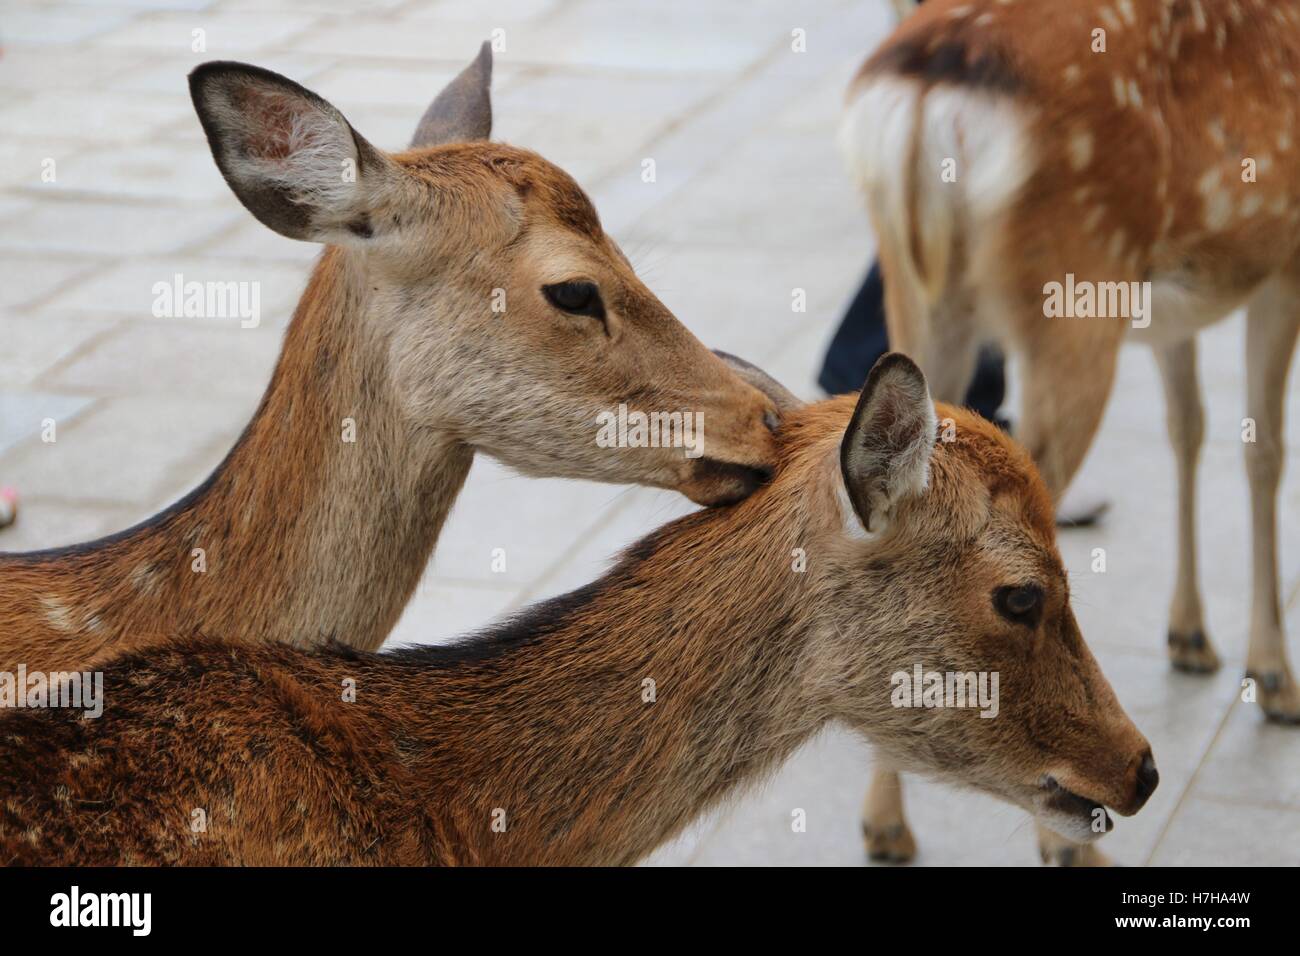 Two friendly young deer one nuzzling the other Stock Photo